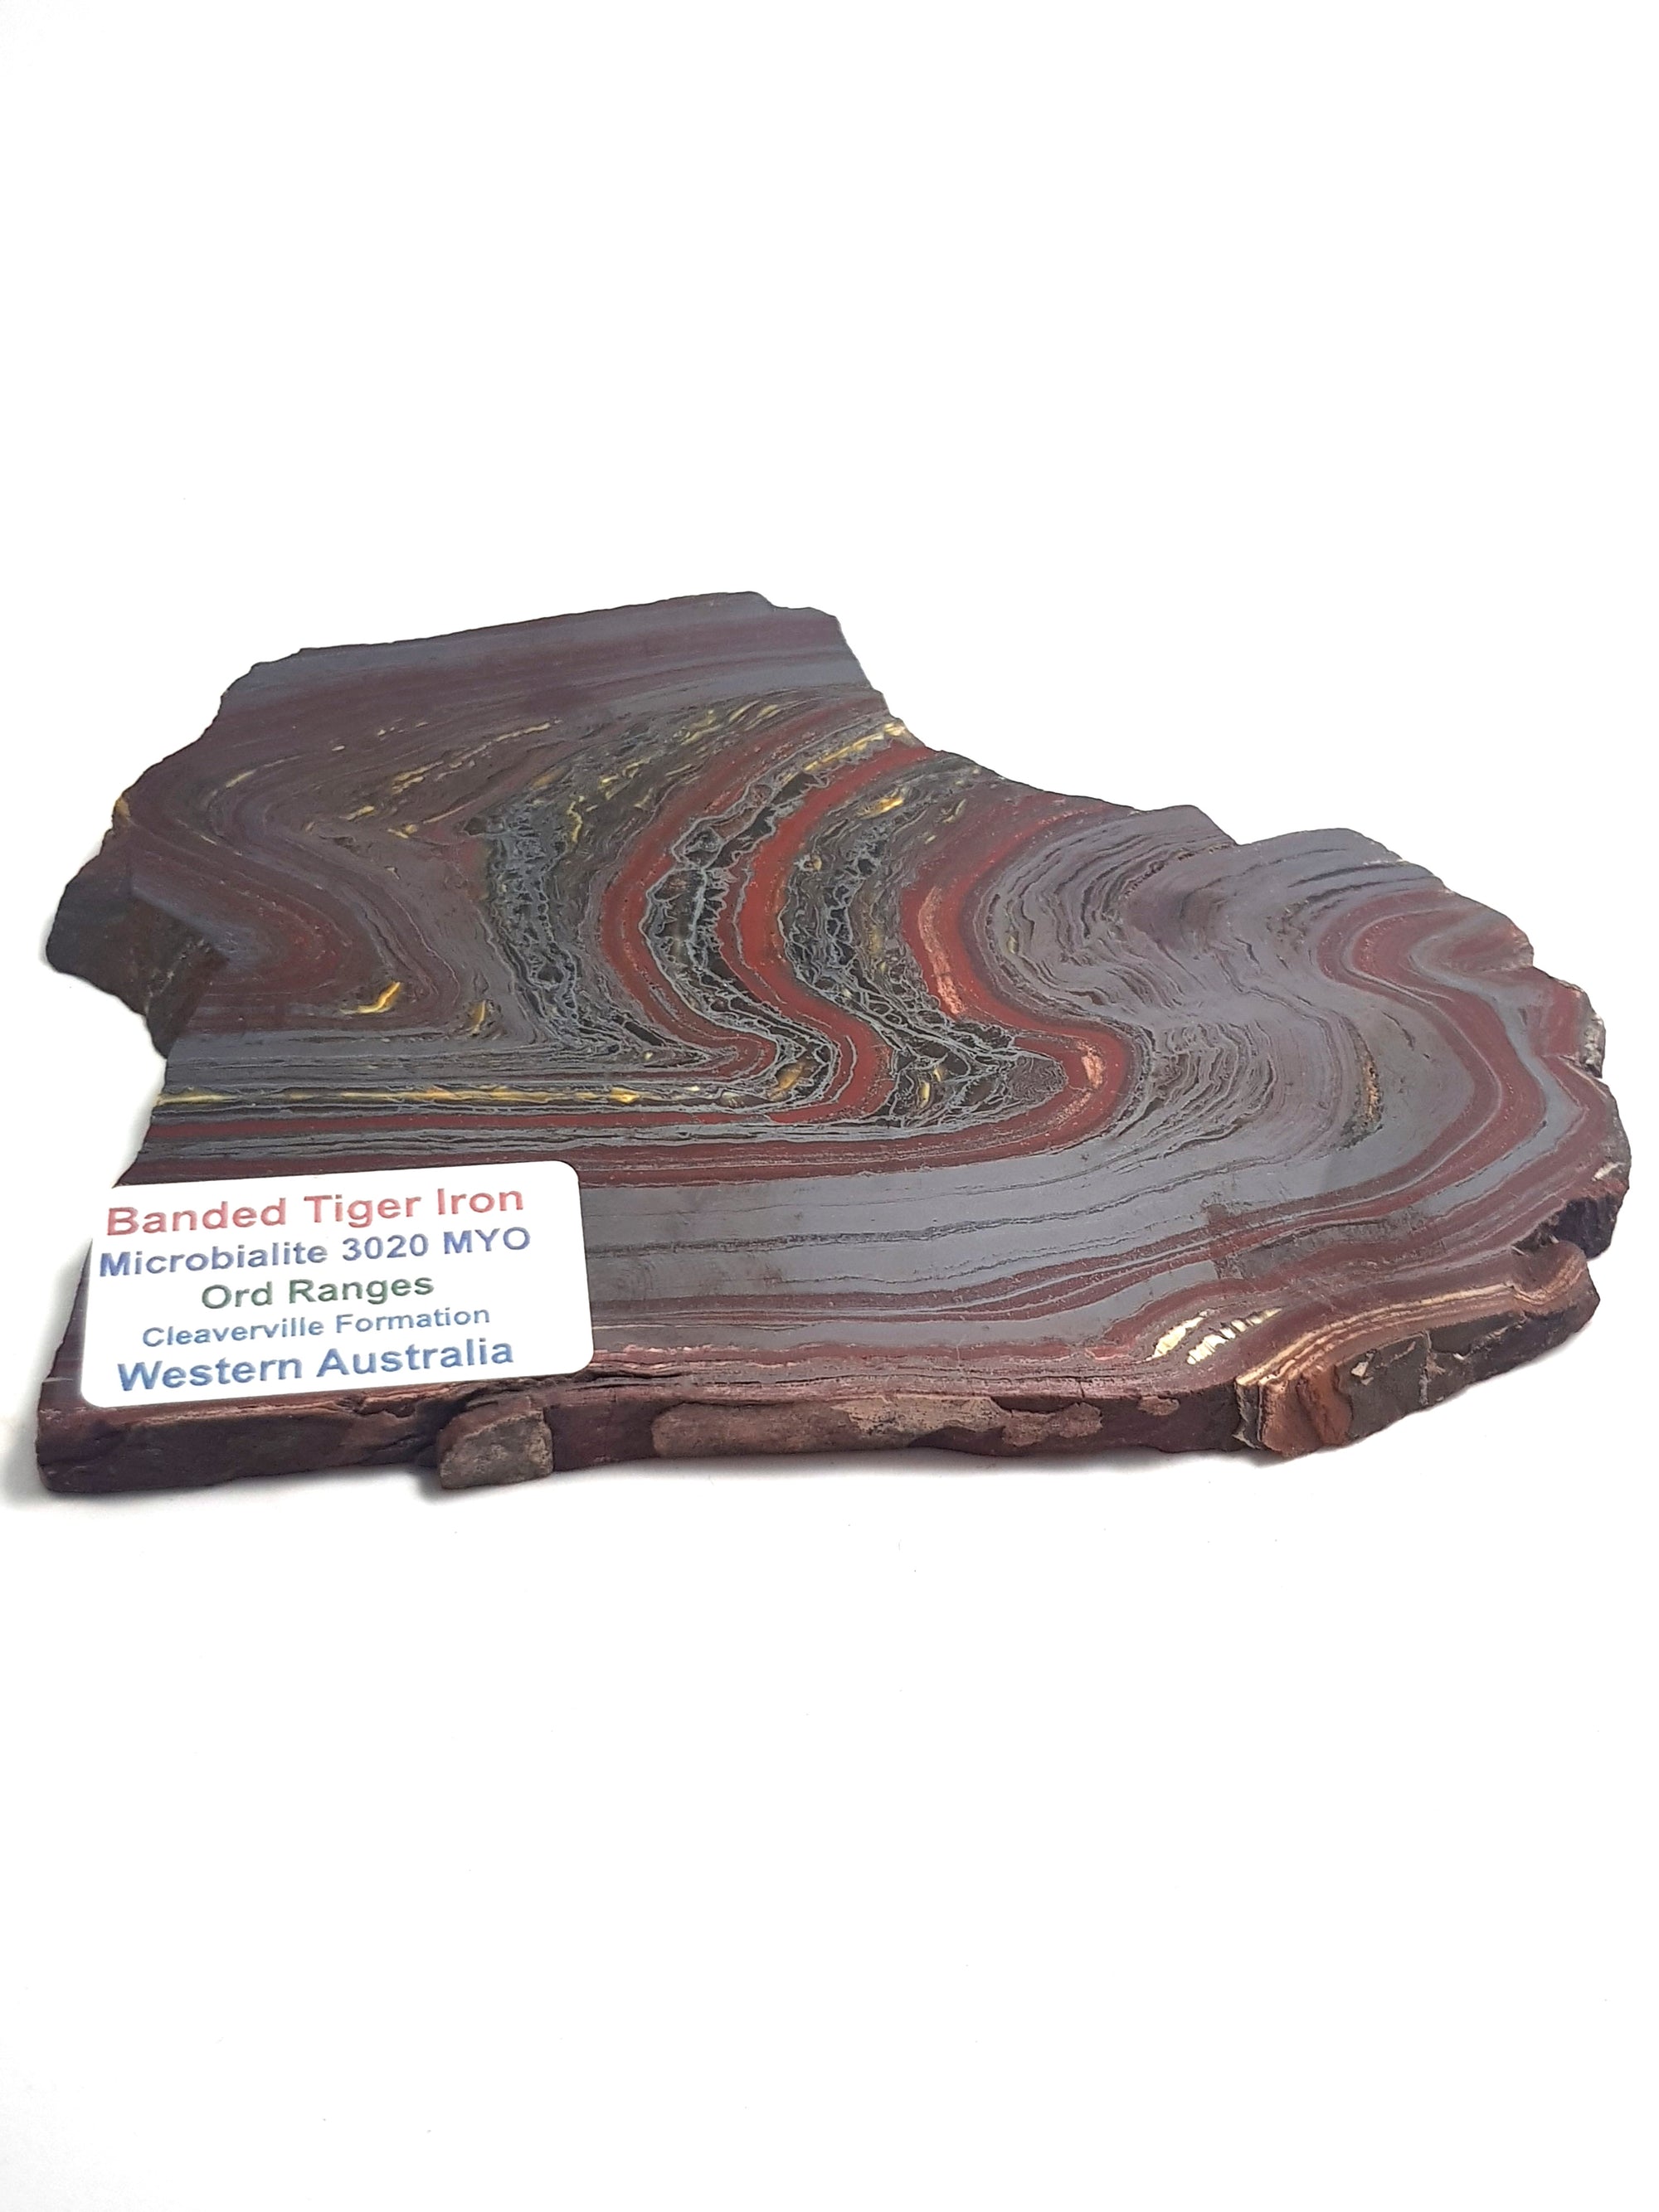 banded iron formation. consists of thin interspersed laminations of hematite and red jasper, with some tiger eye. The original beds have been twisted and squeezed together bending the layers. A printed label on the sample gives its origin and age, this info is present on the entry on the website..